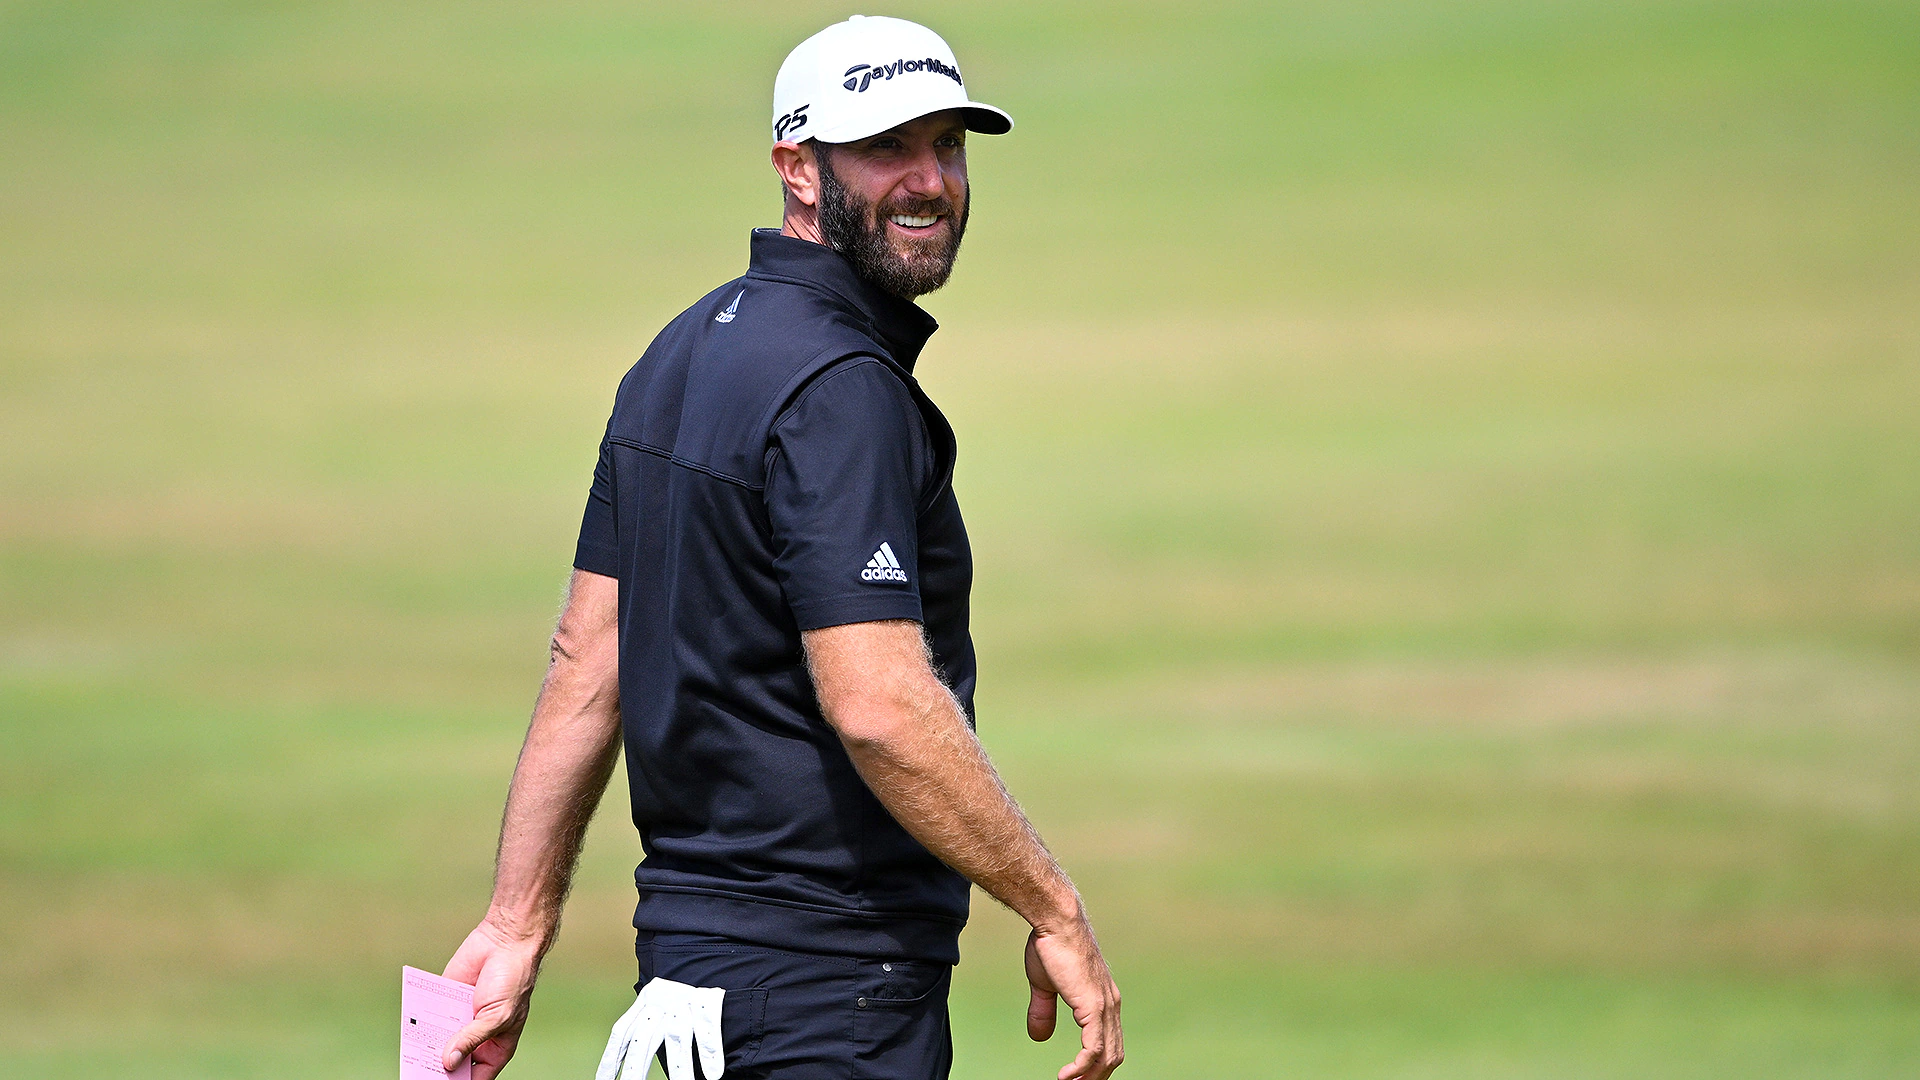 2022 British Open: Noise? What noise? Dustin Johnson avoiding distractions, contending at The Open